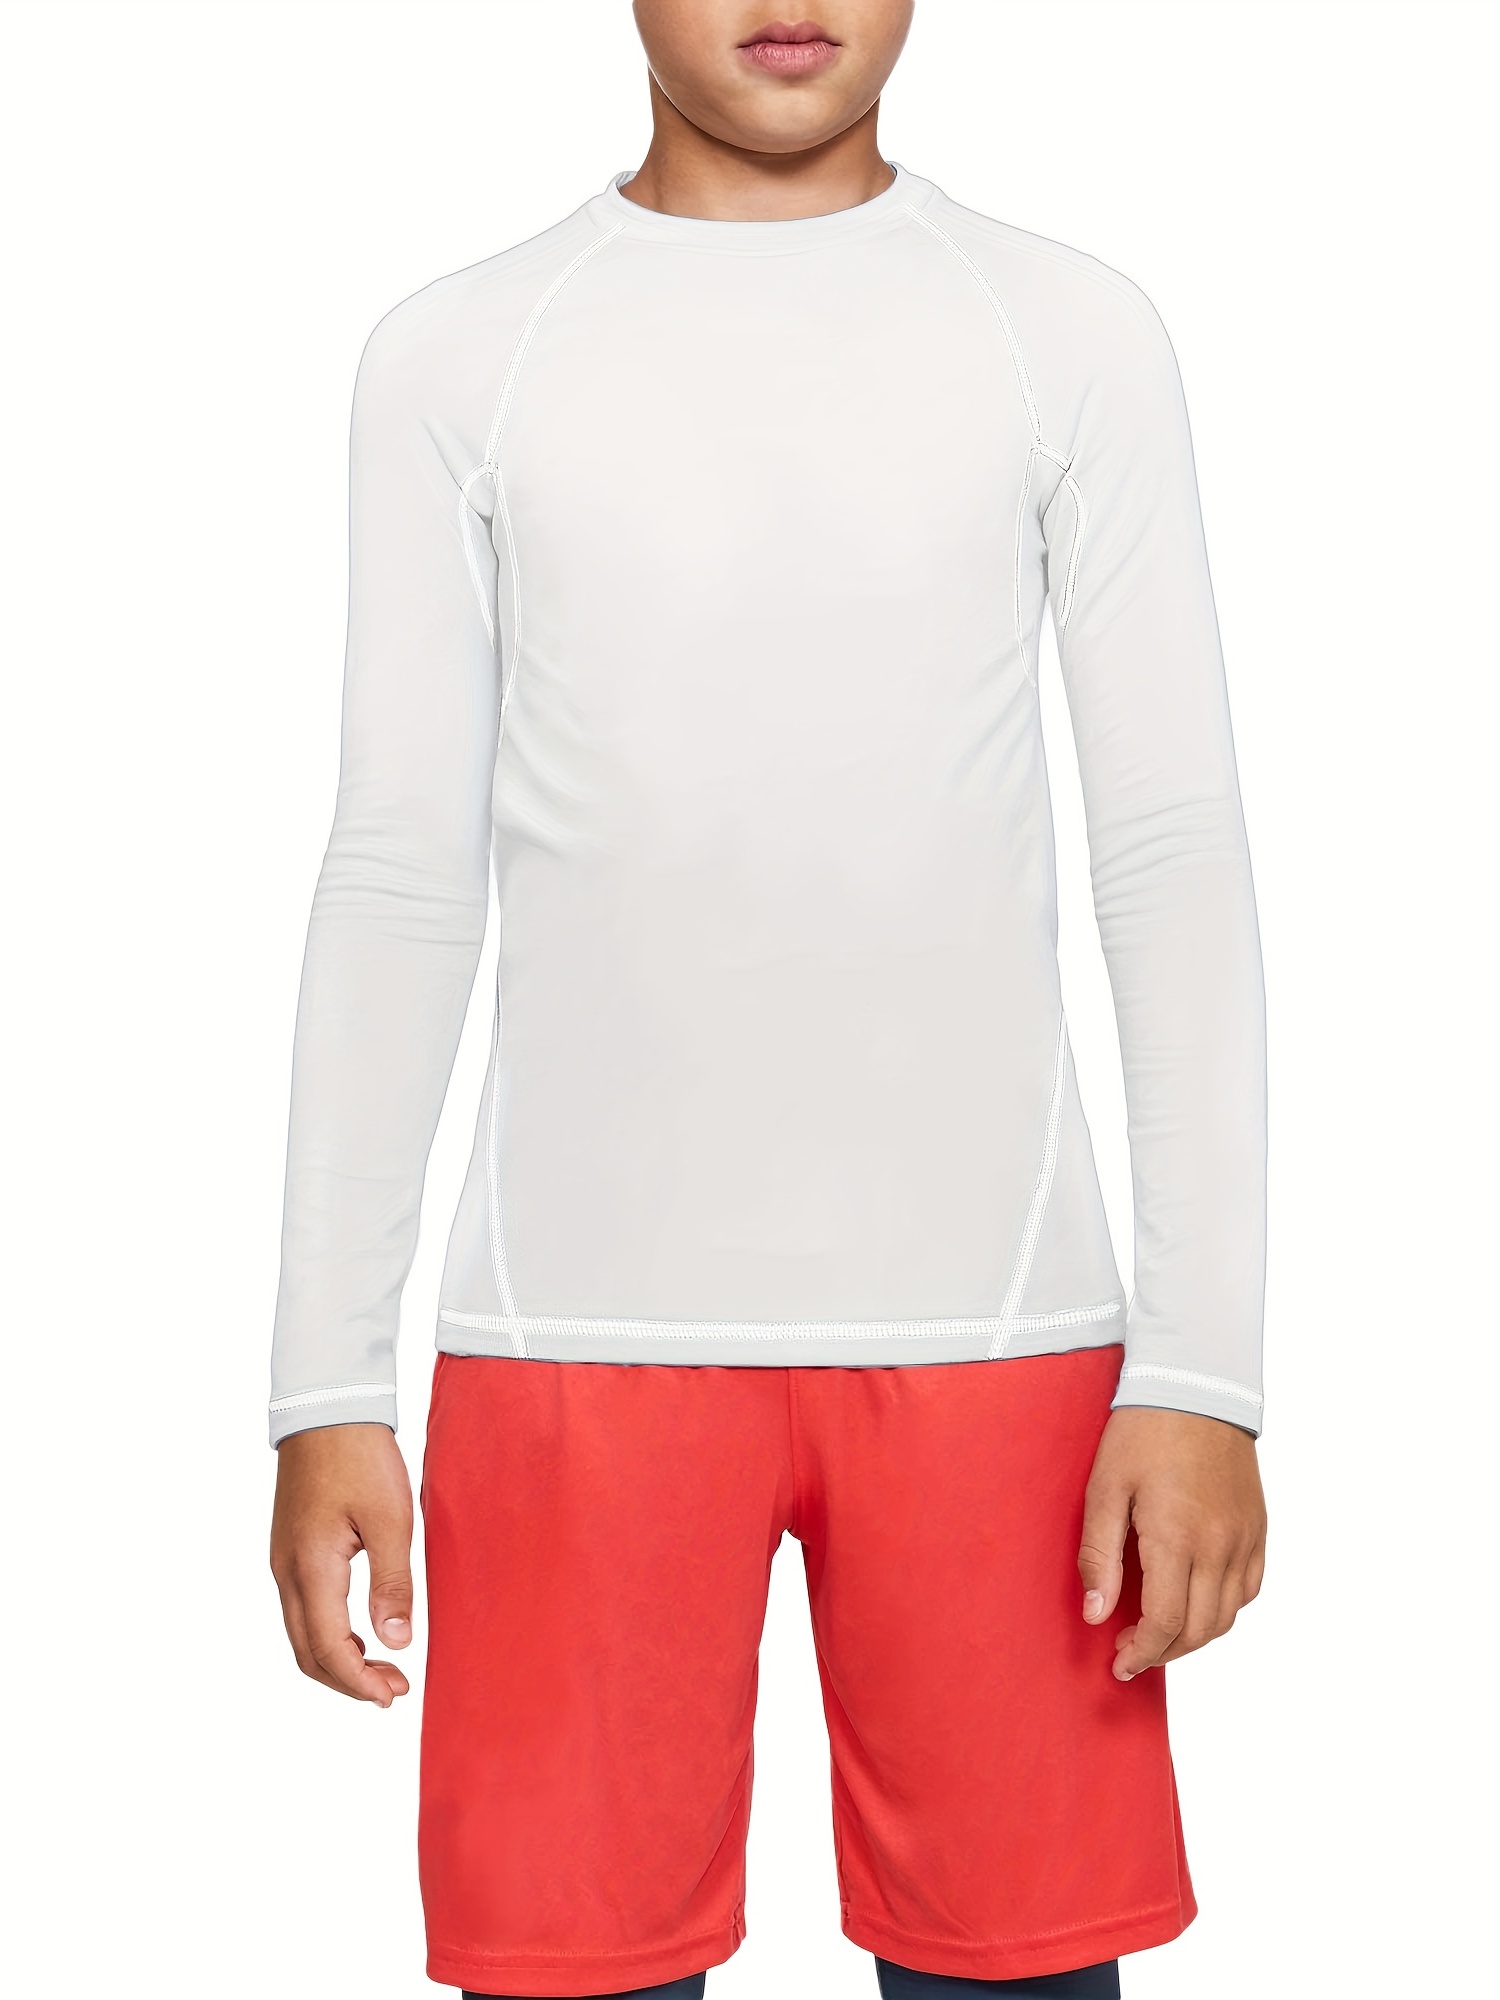 SIX30 Youth Compression Tops, Compression Shirts